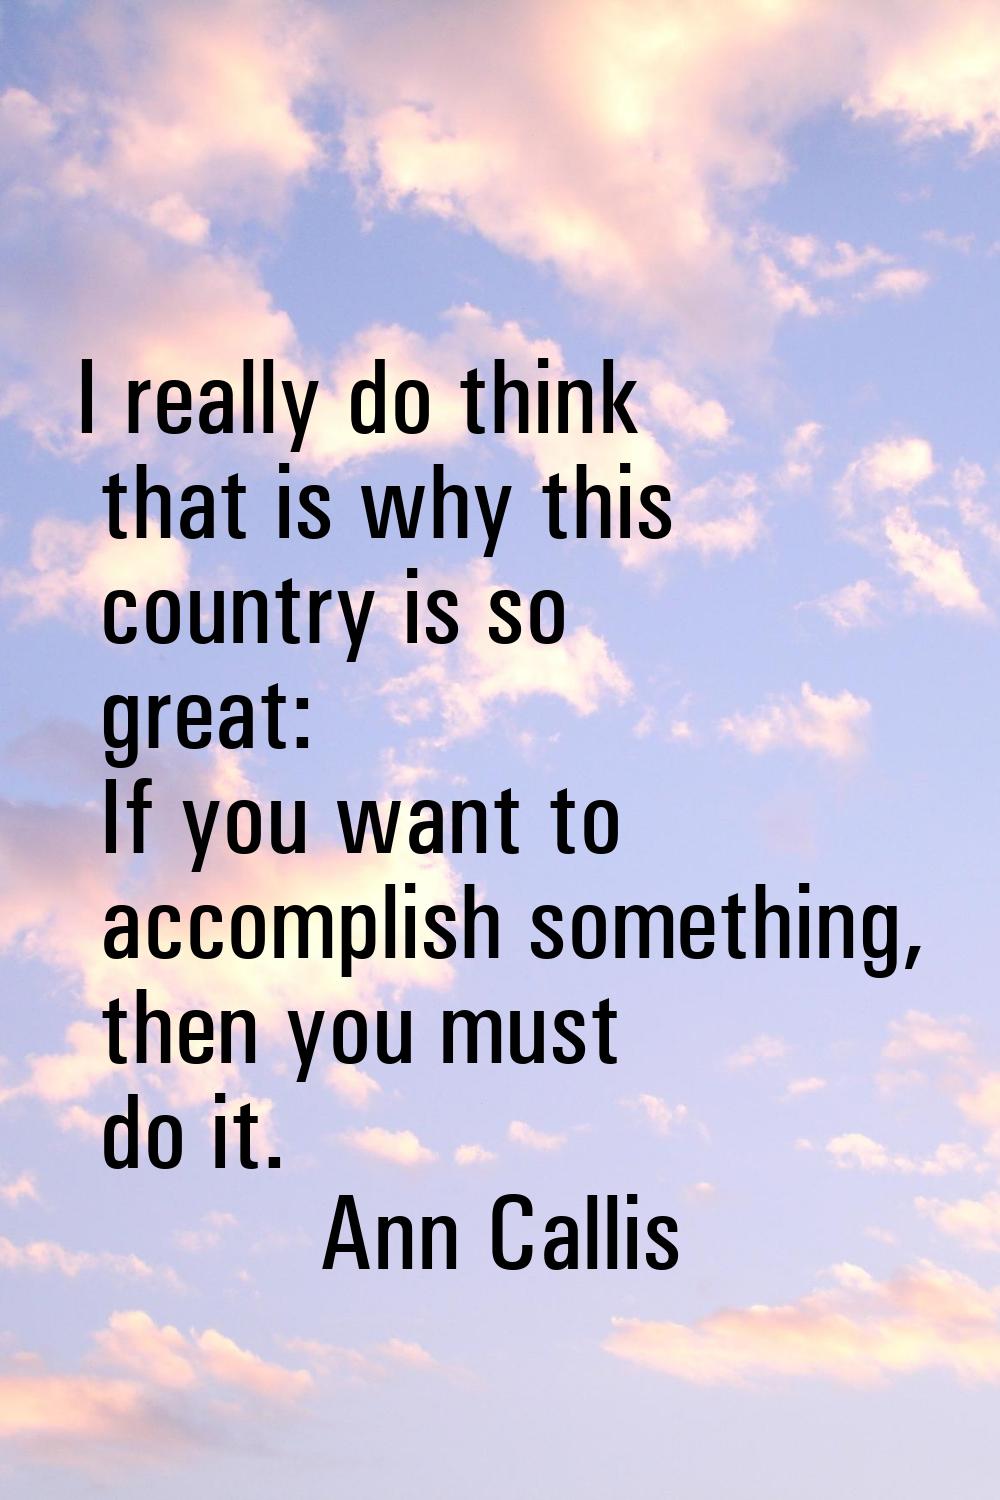 I really do think that is why this country is so great: If you want to accomplish something, then y